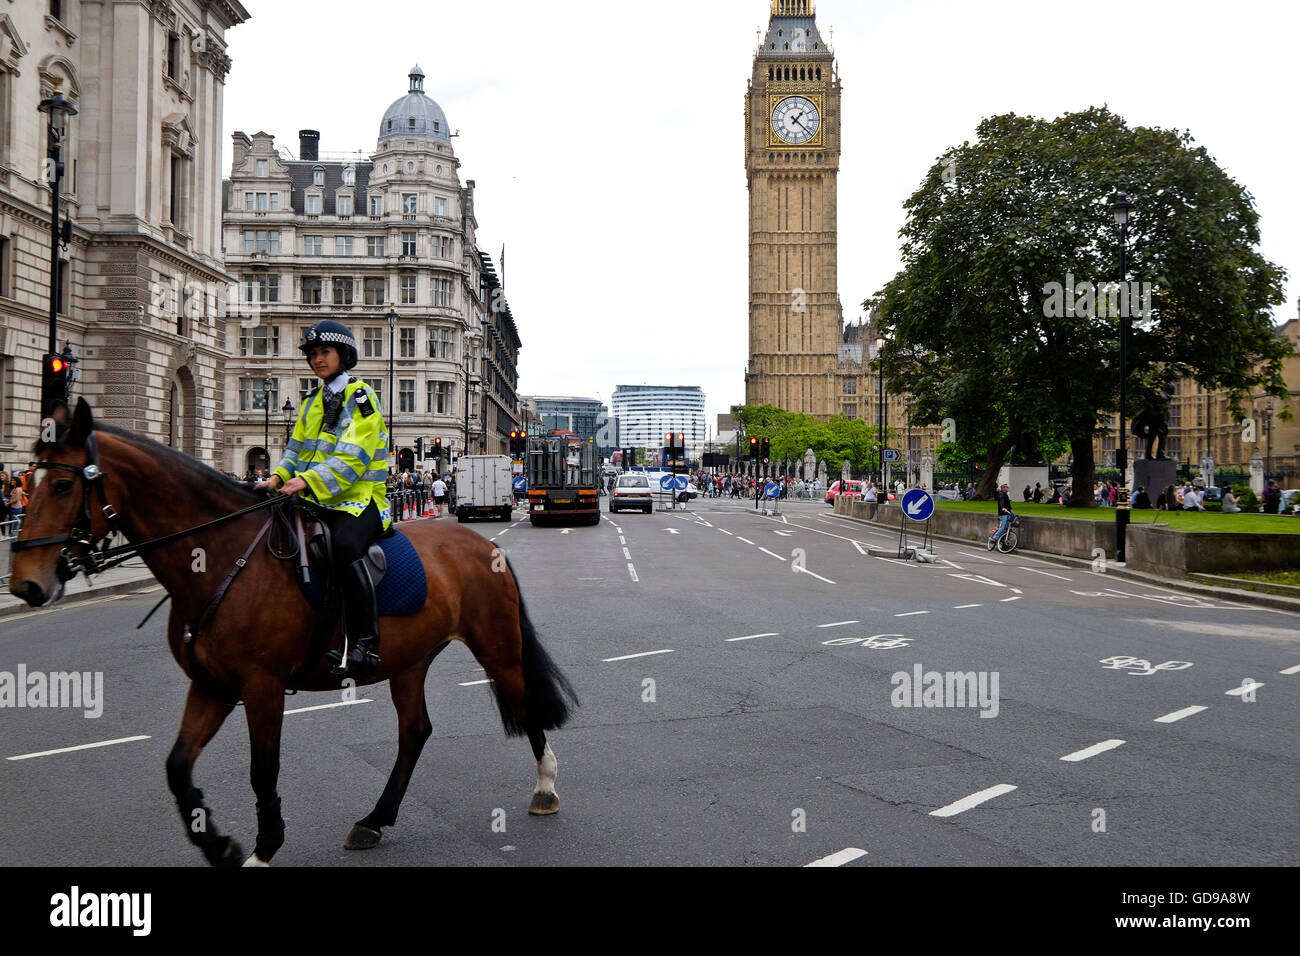 Mounted British police on patrol near Parliament Square London with Big Ben a London landmark in the background Stock Photo